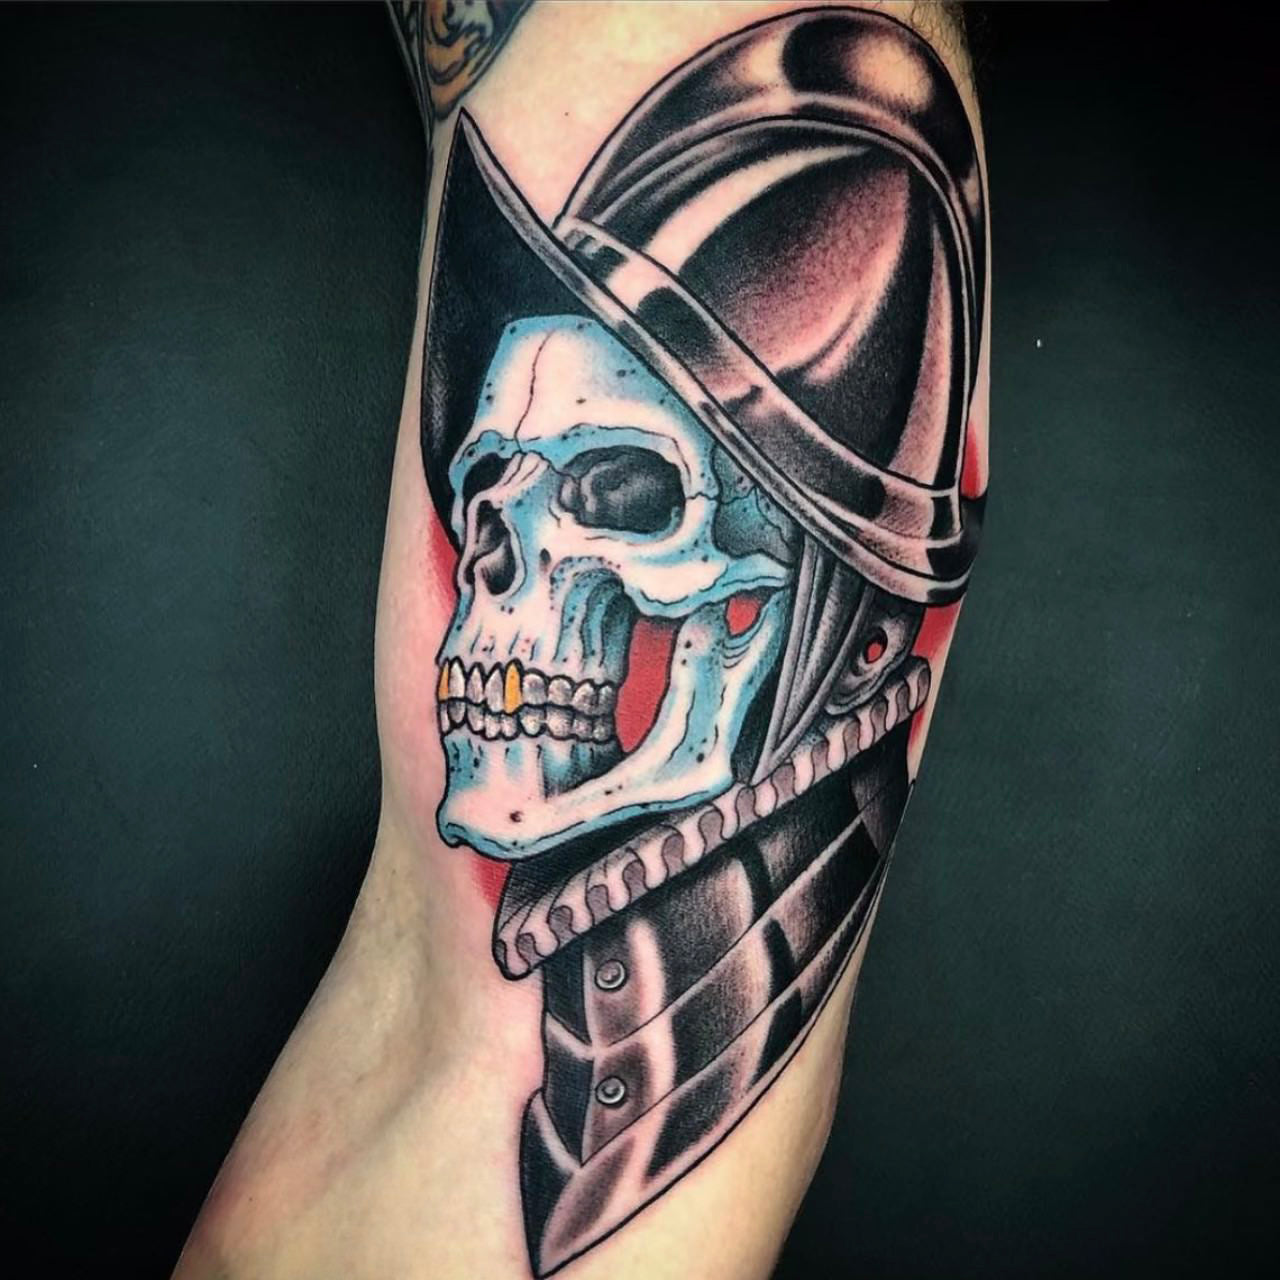 Skull Tattoo Meanings: Everyone Faces It